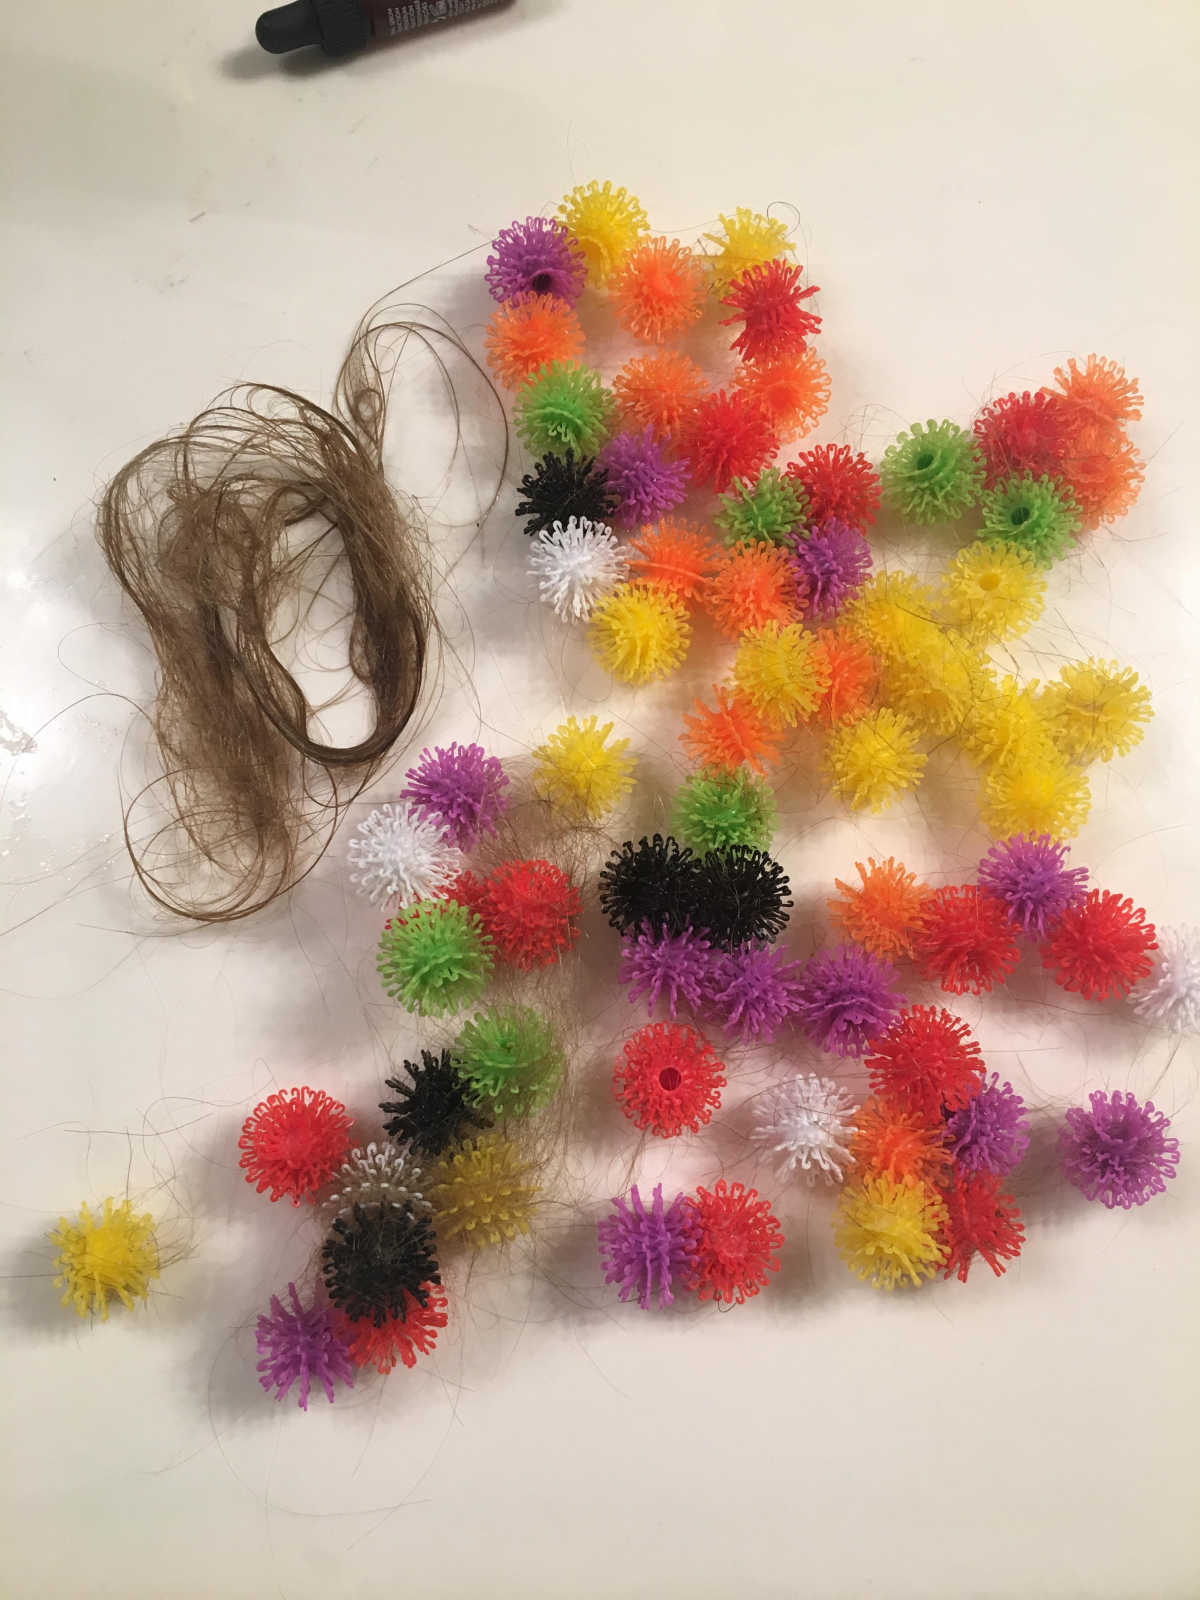 Bunchems causing problems by bunching in kids' hair